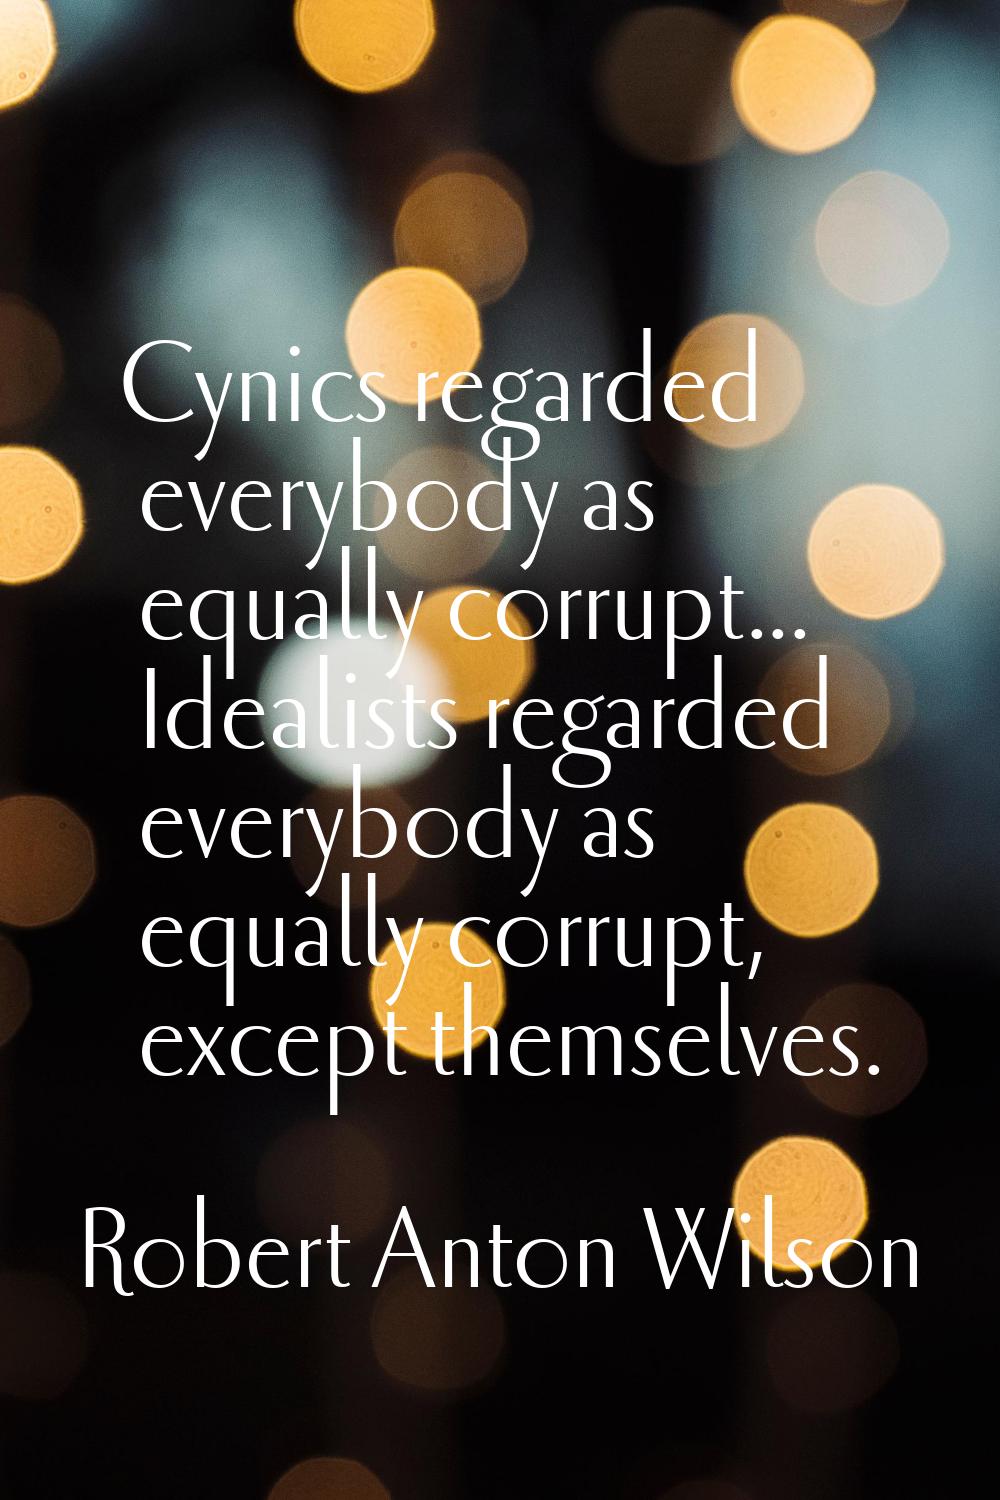 Cynics regarded everybody as equally corrupt... Idealists regarded everybody as equally corrupt, ex